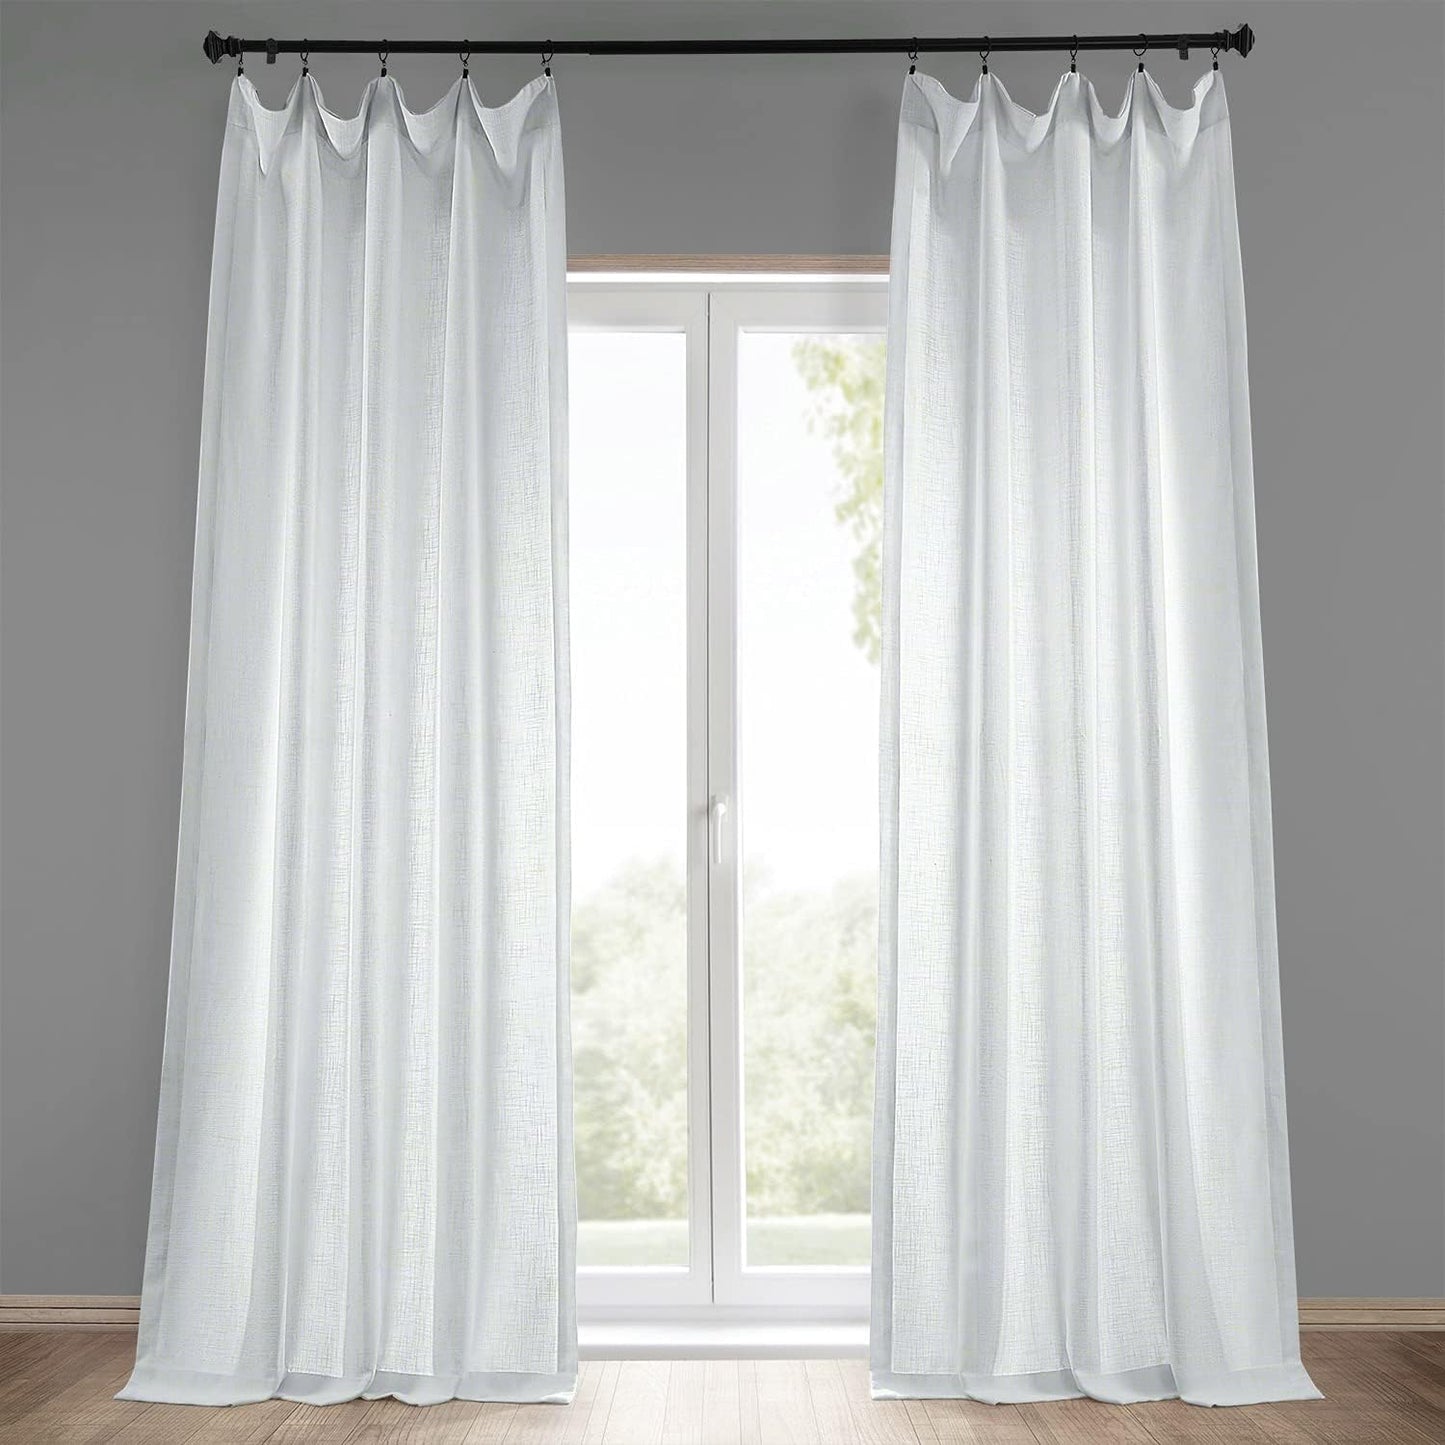 HPD Half Price Drapes Semi Sheer Faux Linen Curtains for Bedroom 96 Inches Long Light Filtering Living Room Window Curtain (1 Panel), 50W X 96L, Rice White  EFF Rice White 50W X 120L 